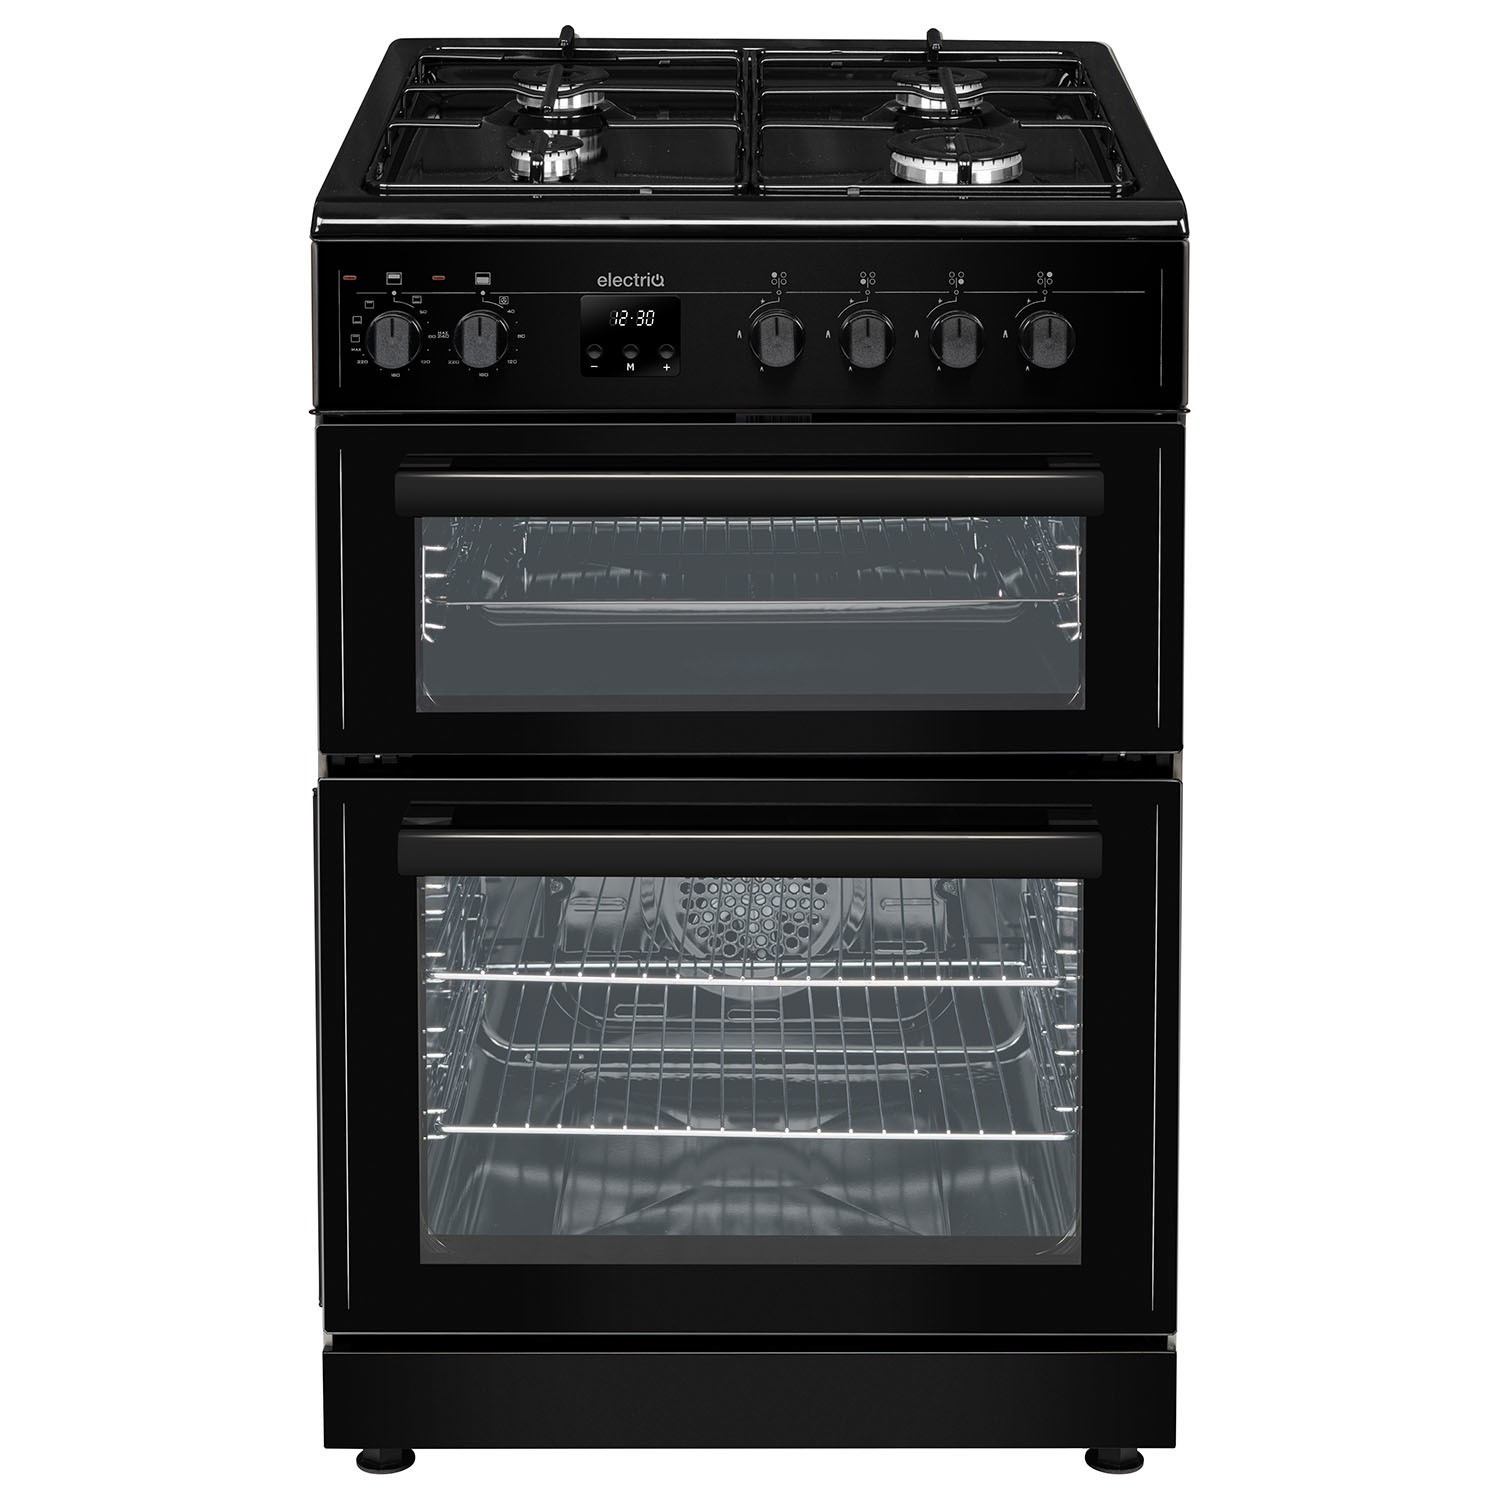 electriQ 60cm Dual Fuel Cooker with Double Oven - Black